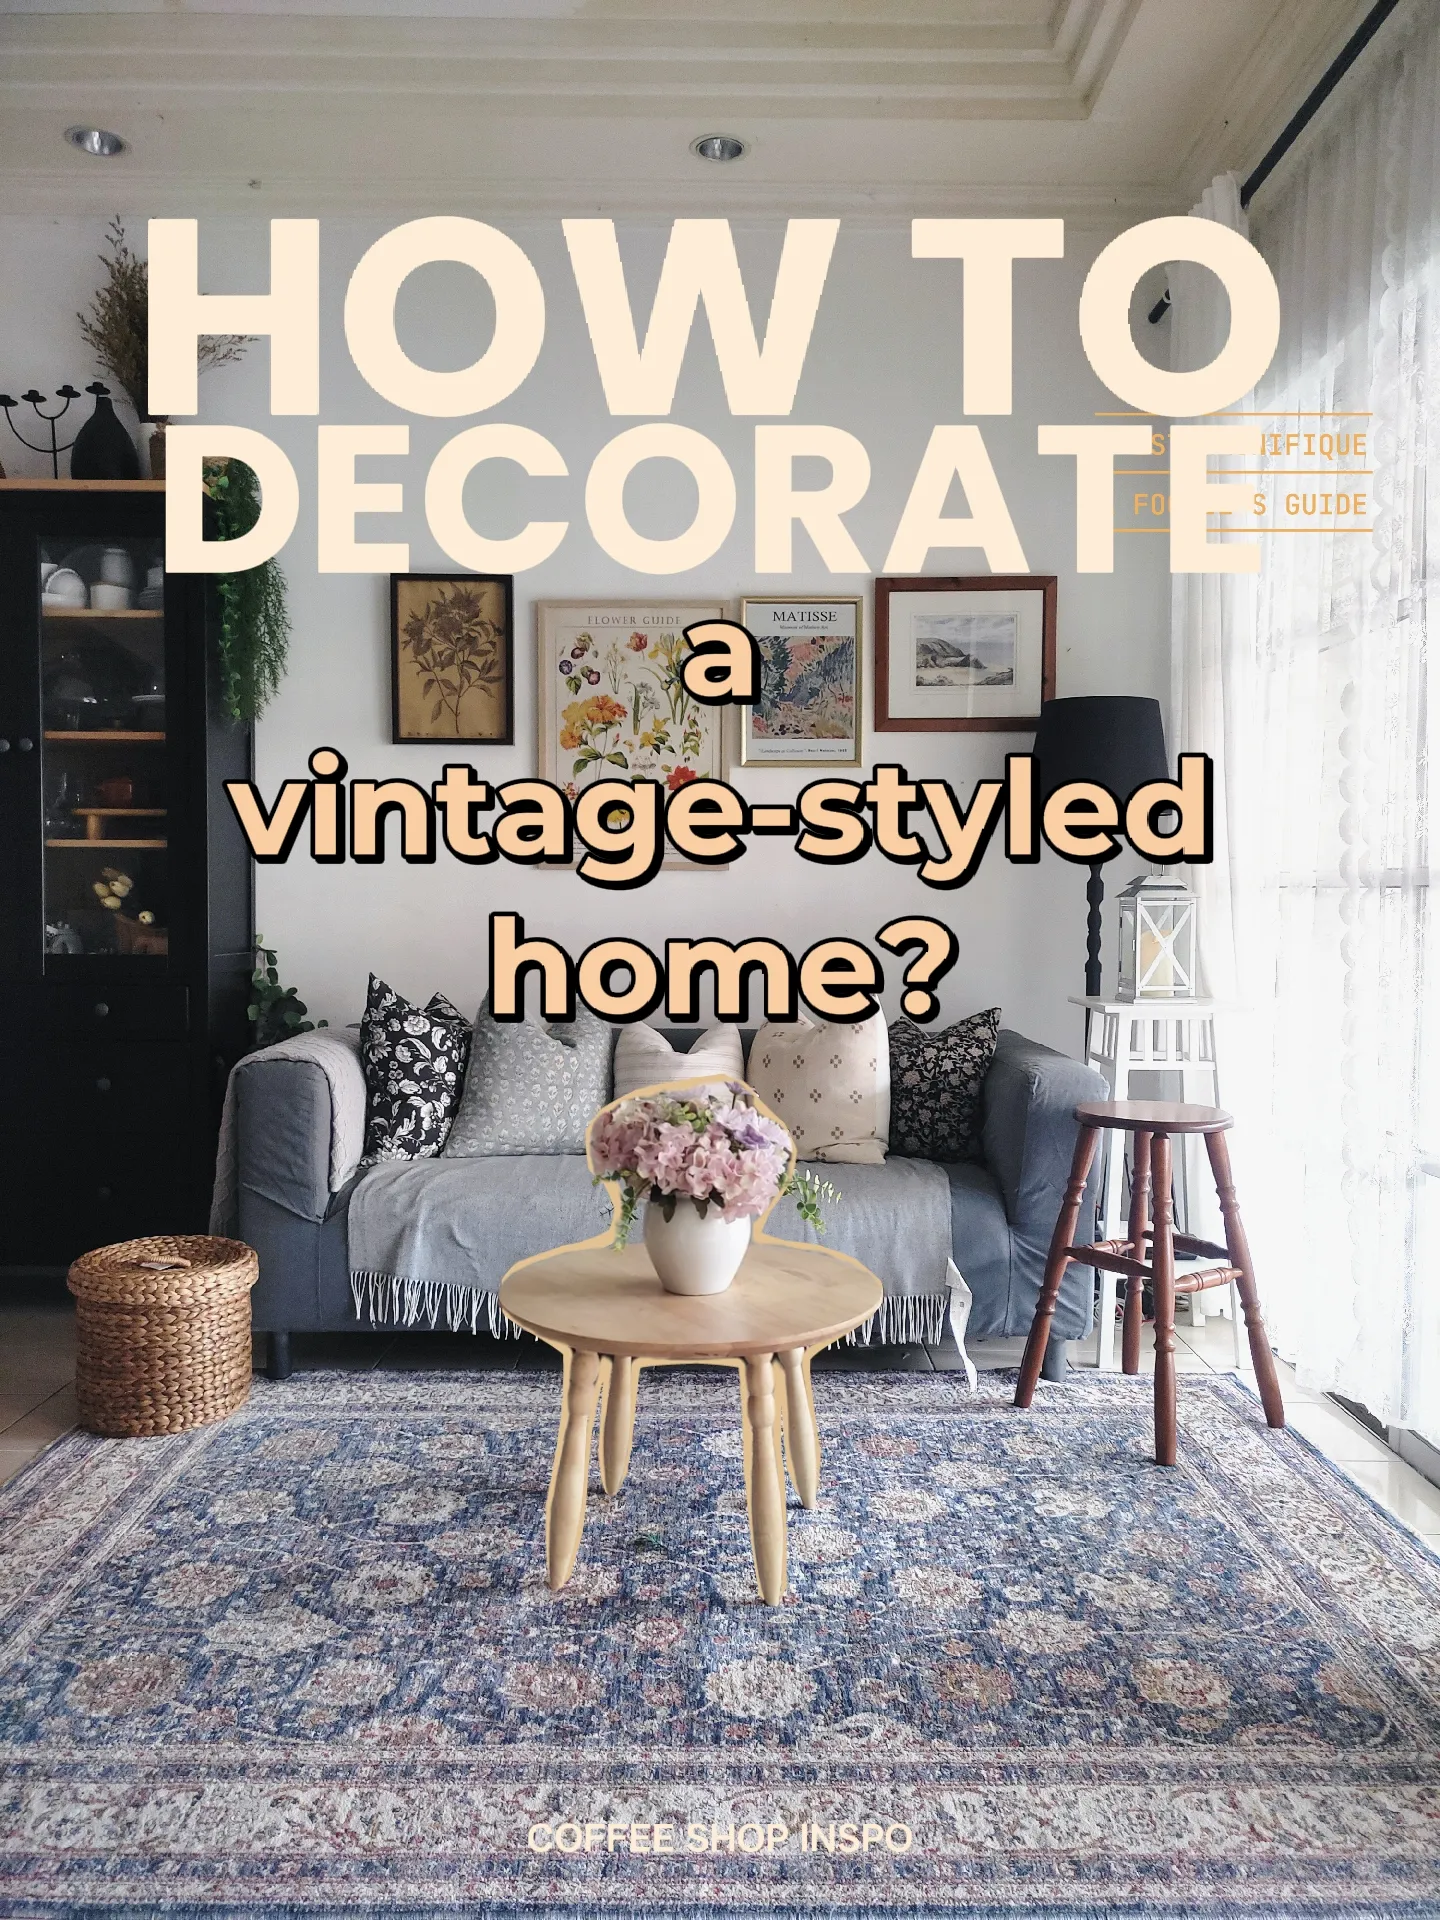 Guide to Vintage Home Decorating & Shopping